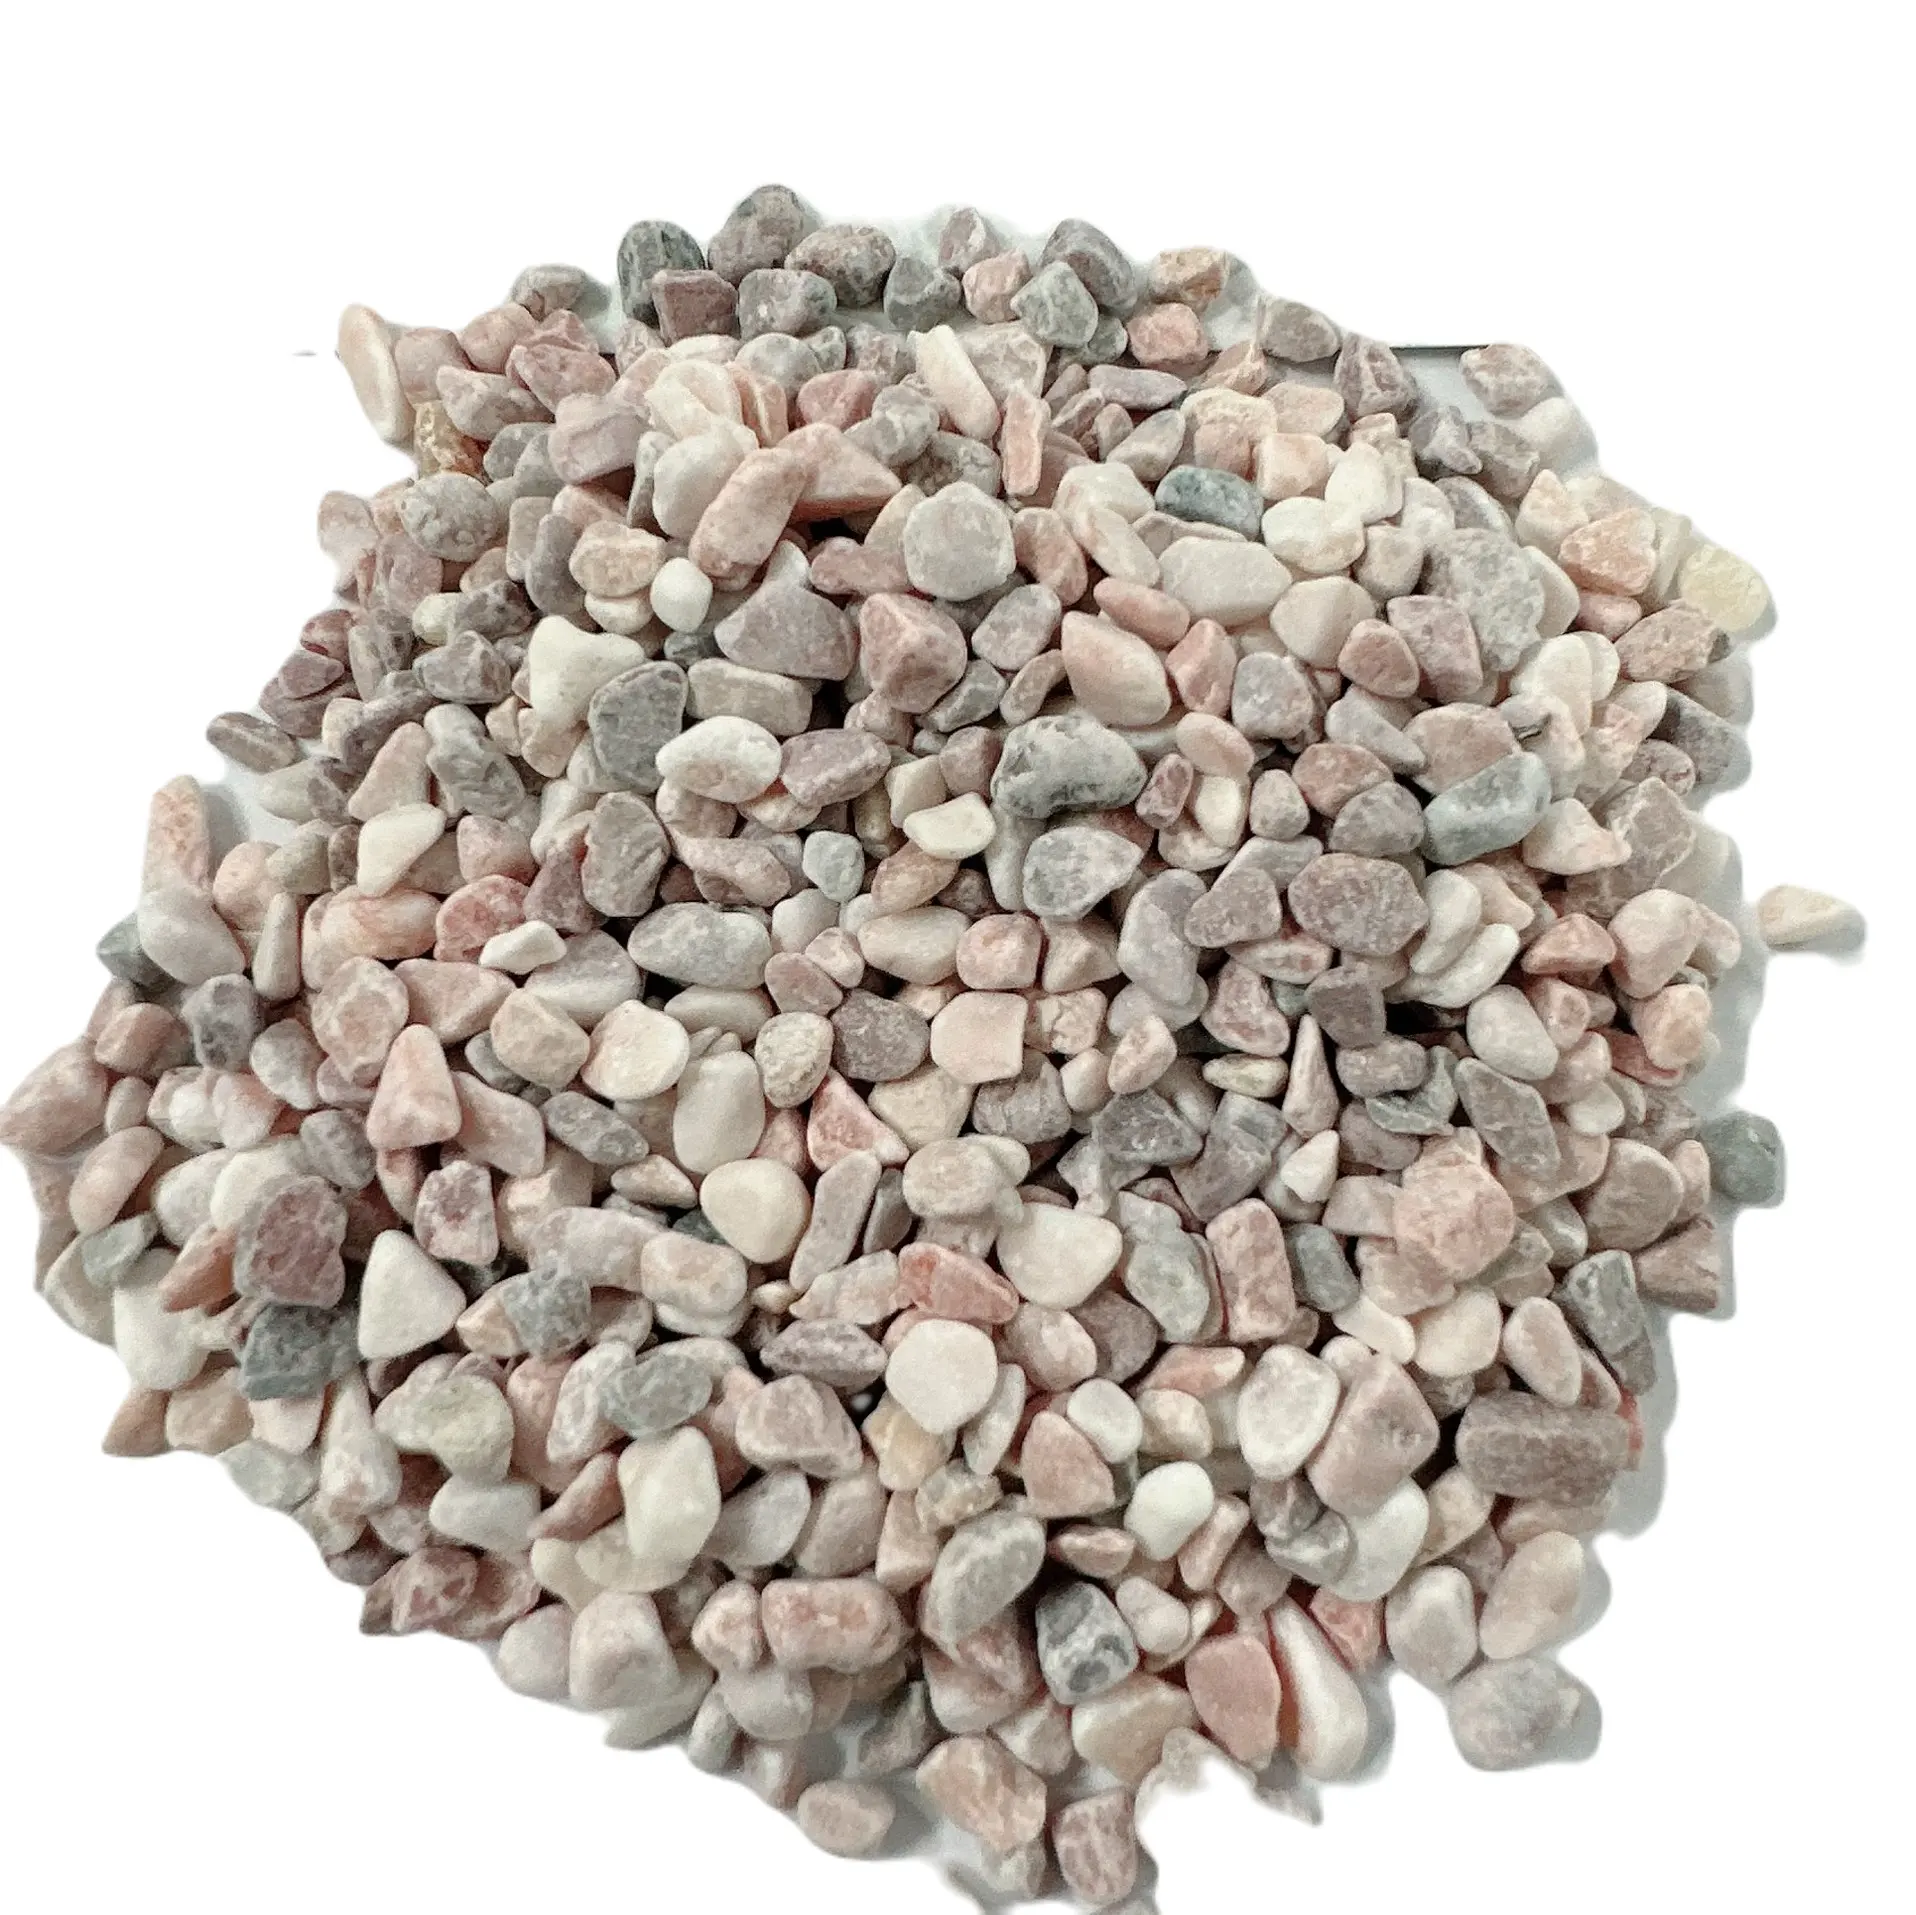 HOT SALE Pebble Stones from Viet Nam suppliers for garden landscaping, interior and exterior wall at cheap price